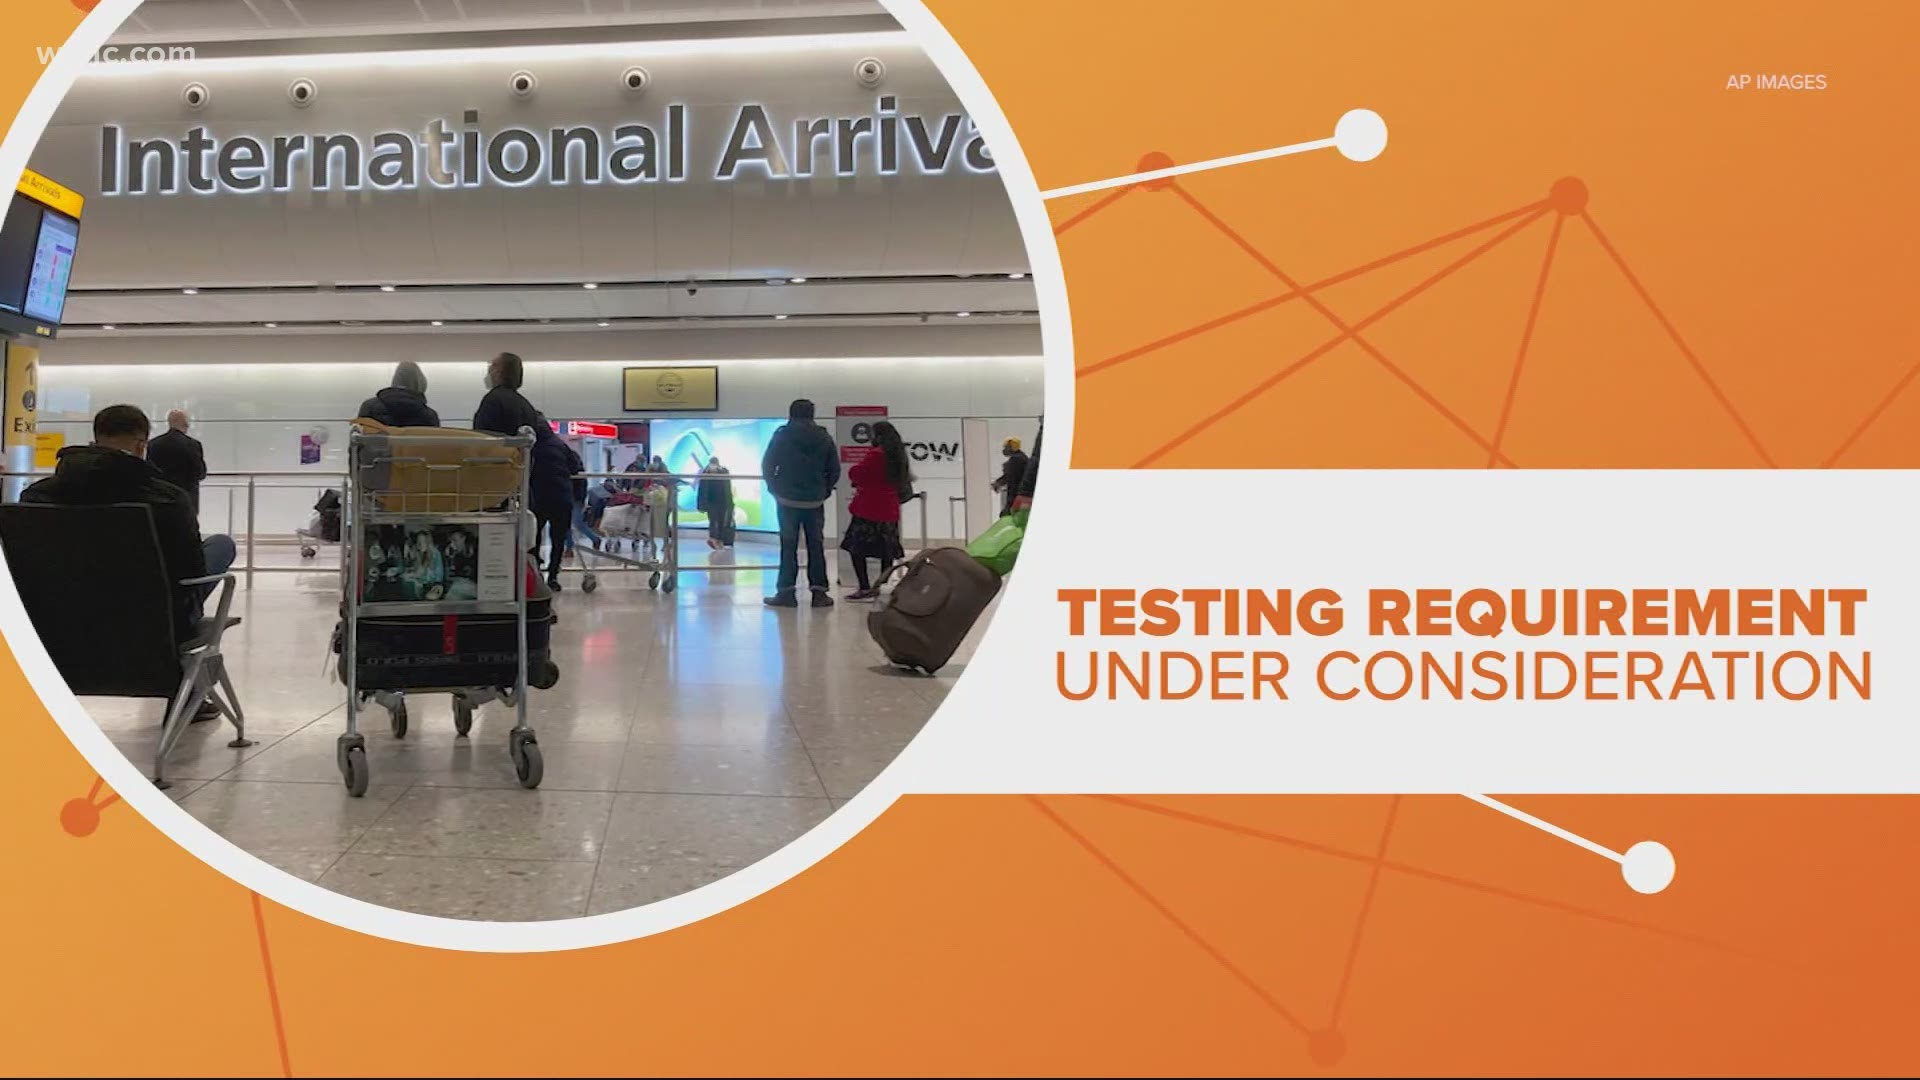 International travelers are required to have a negative COVID test to fly to the US. But so far that same rule does not apply to domestic flights. That could change.